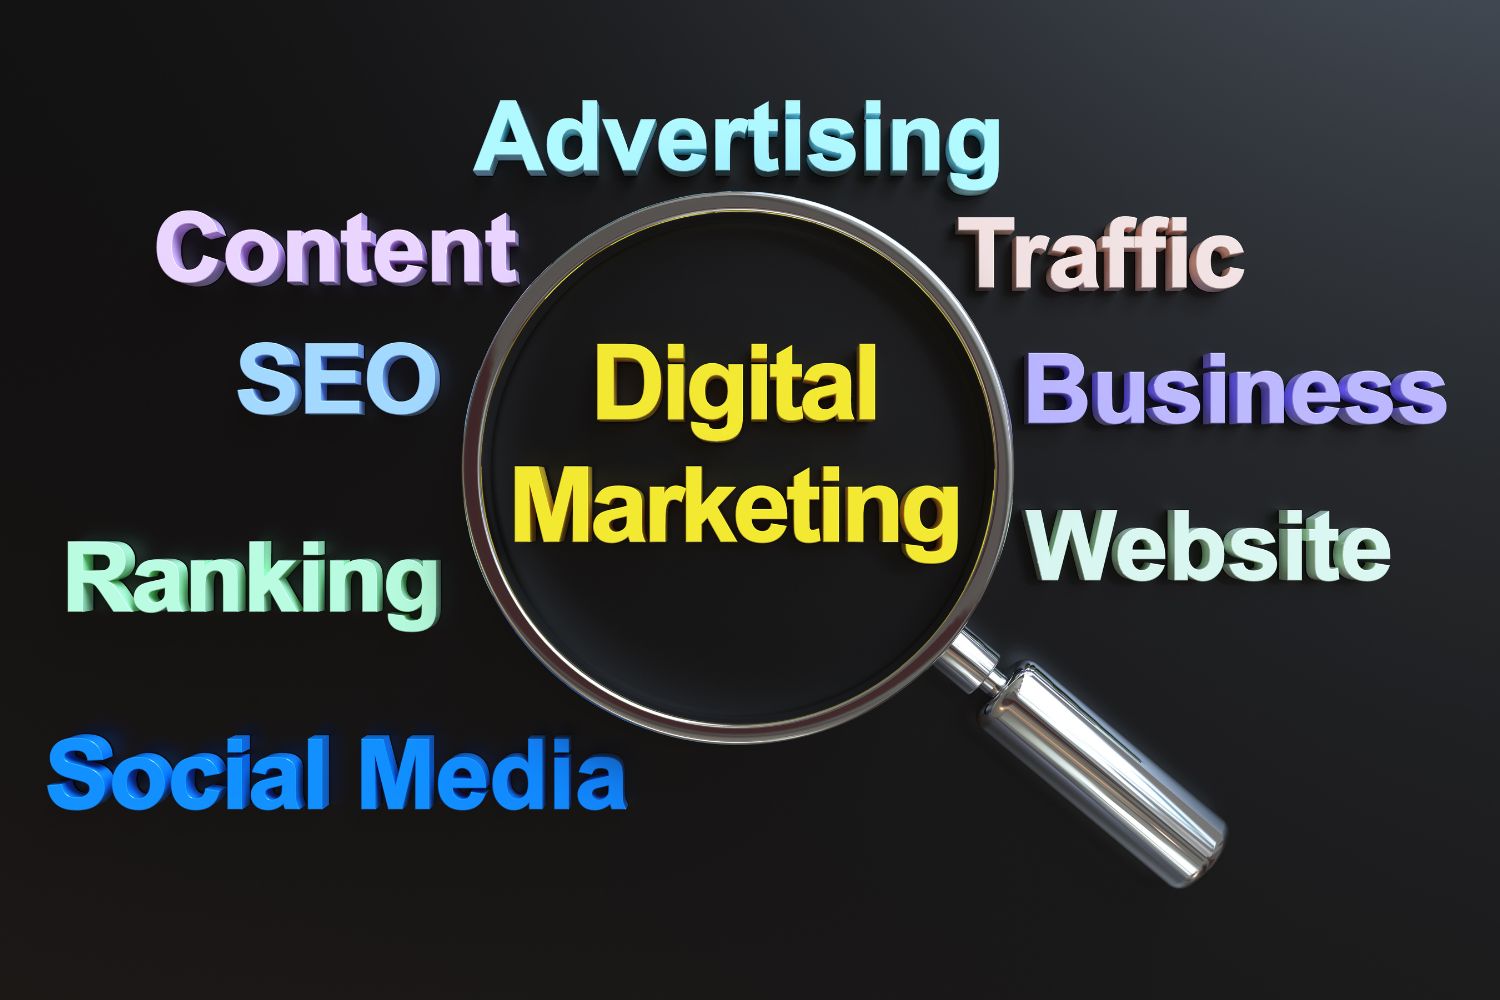 How to use digital marketing to grow your business